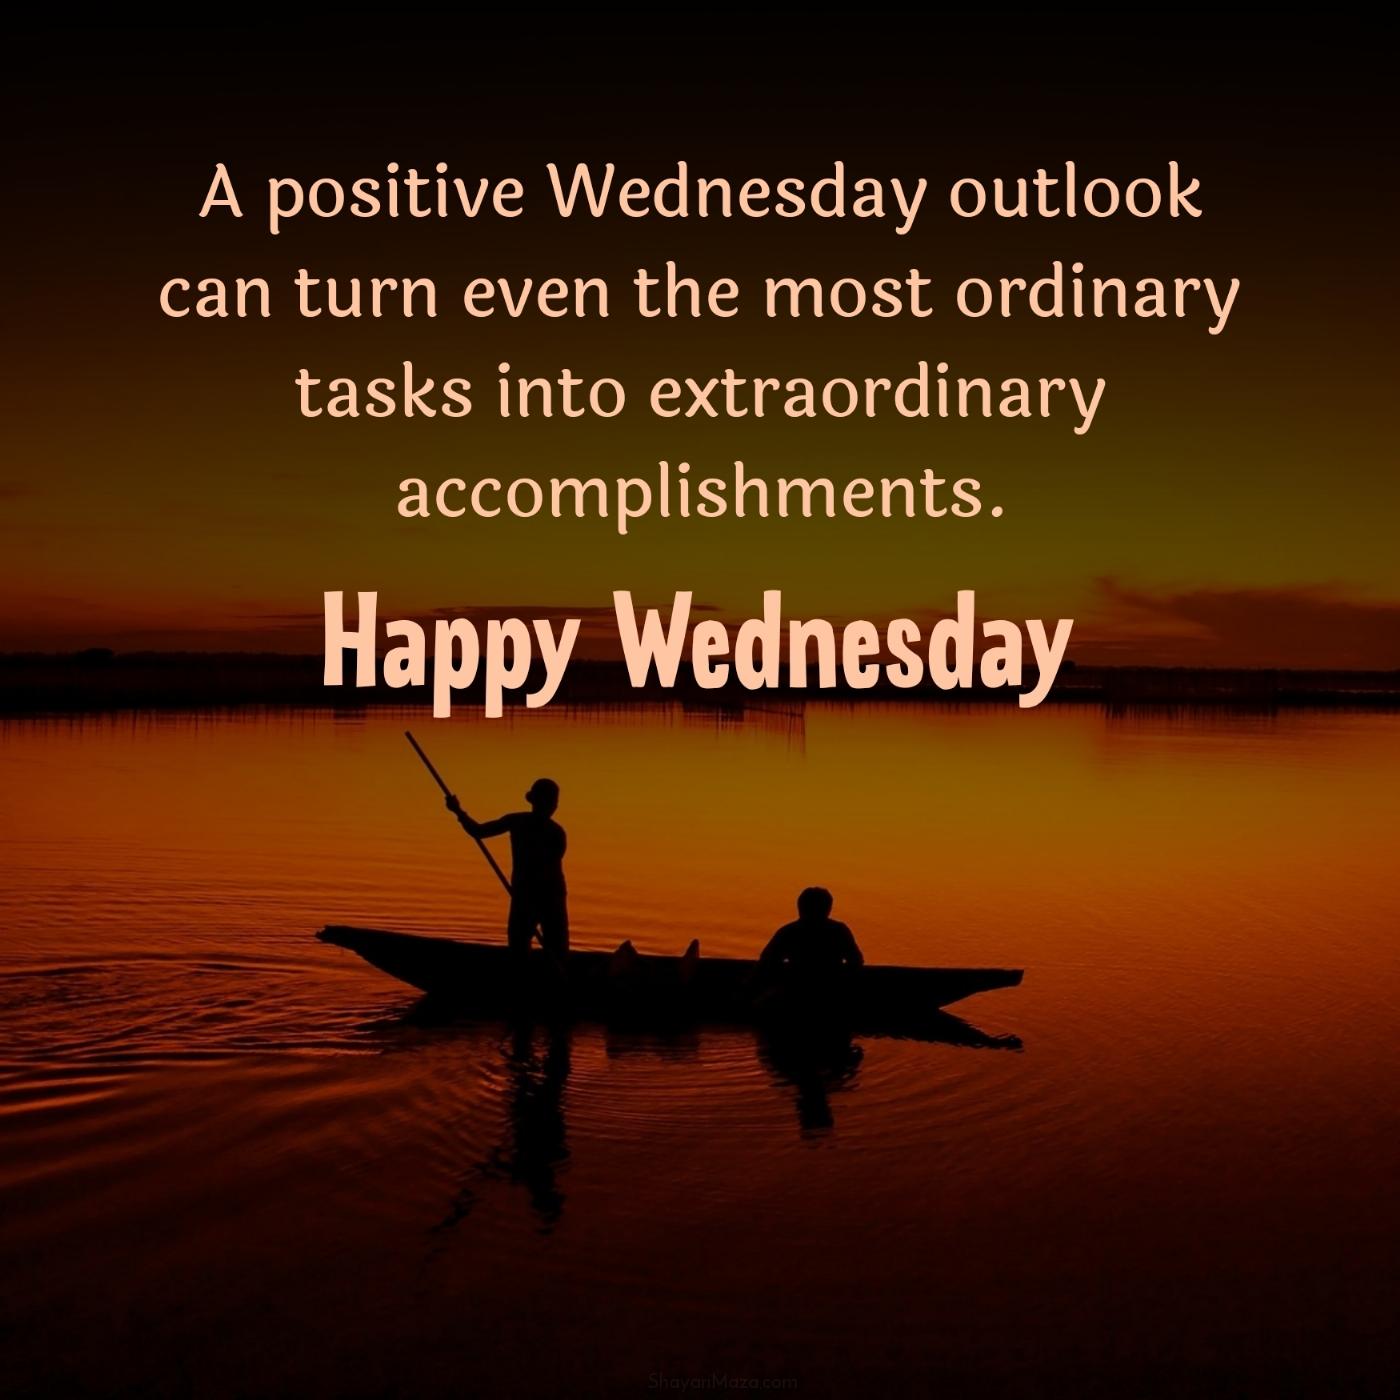 A positive Wednesday outlook can turn even the most ordinary tasks